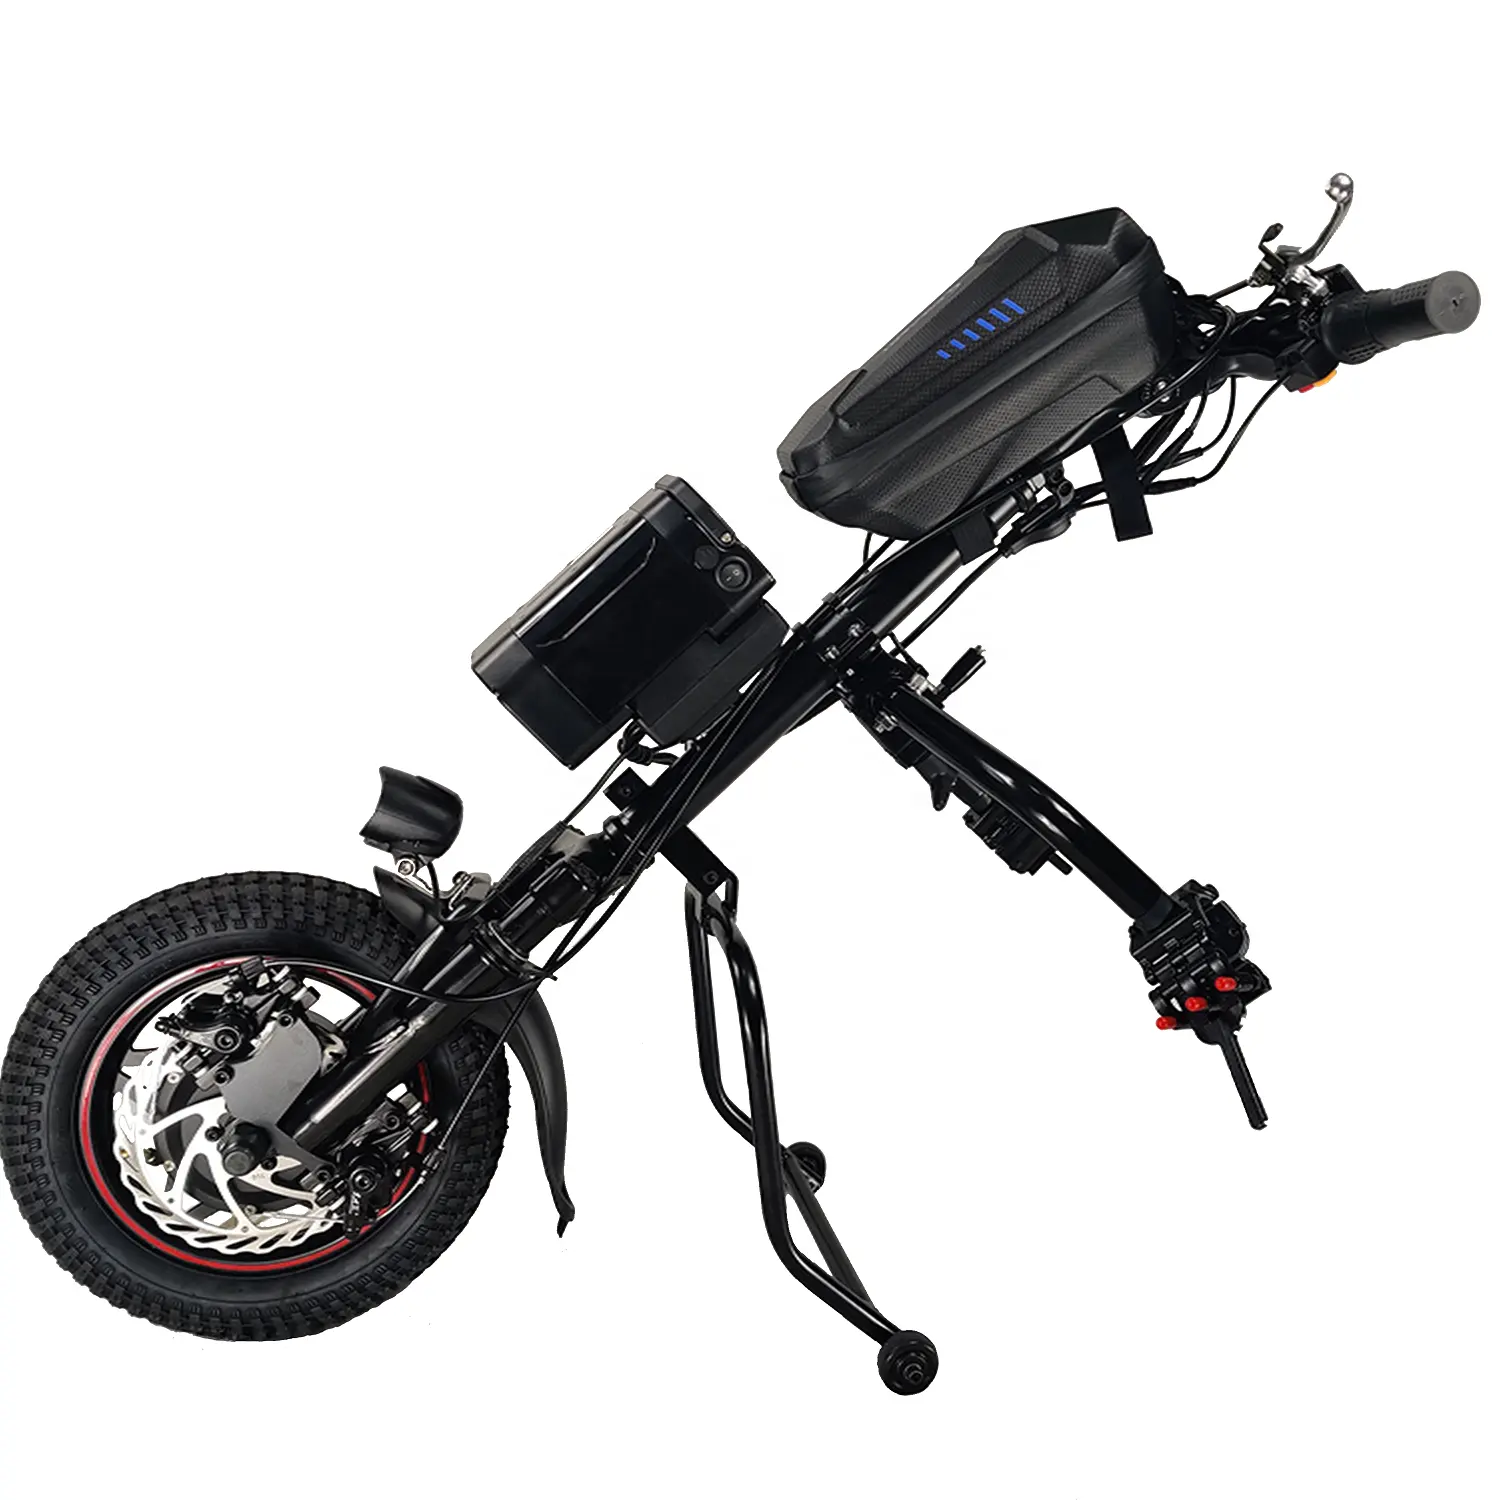 Cnebikes Manufacture 12 suspension wheelchairs attachment handcycle with lcd 007 display handbikes